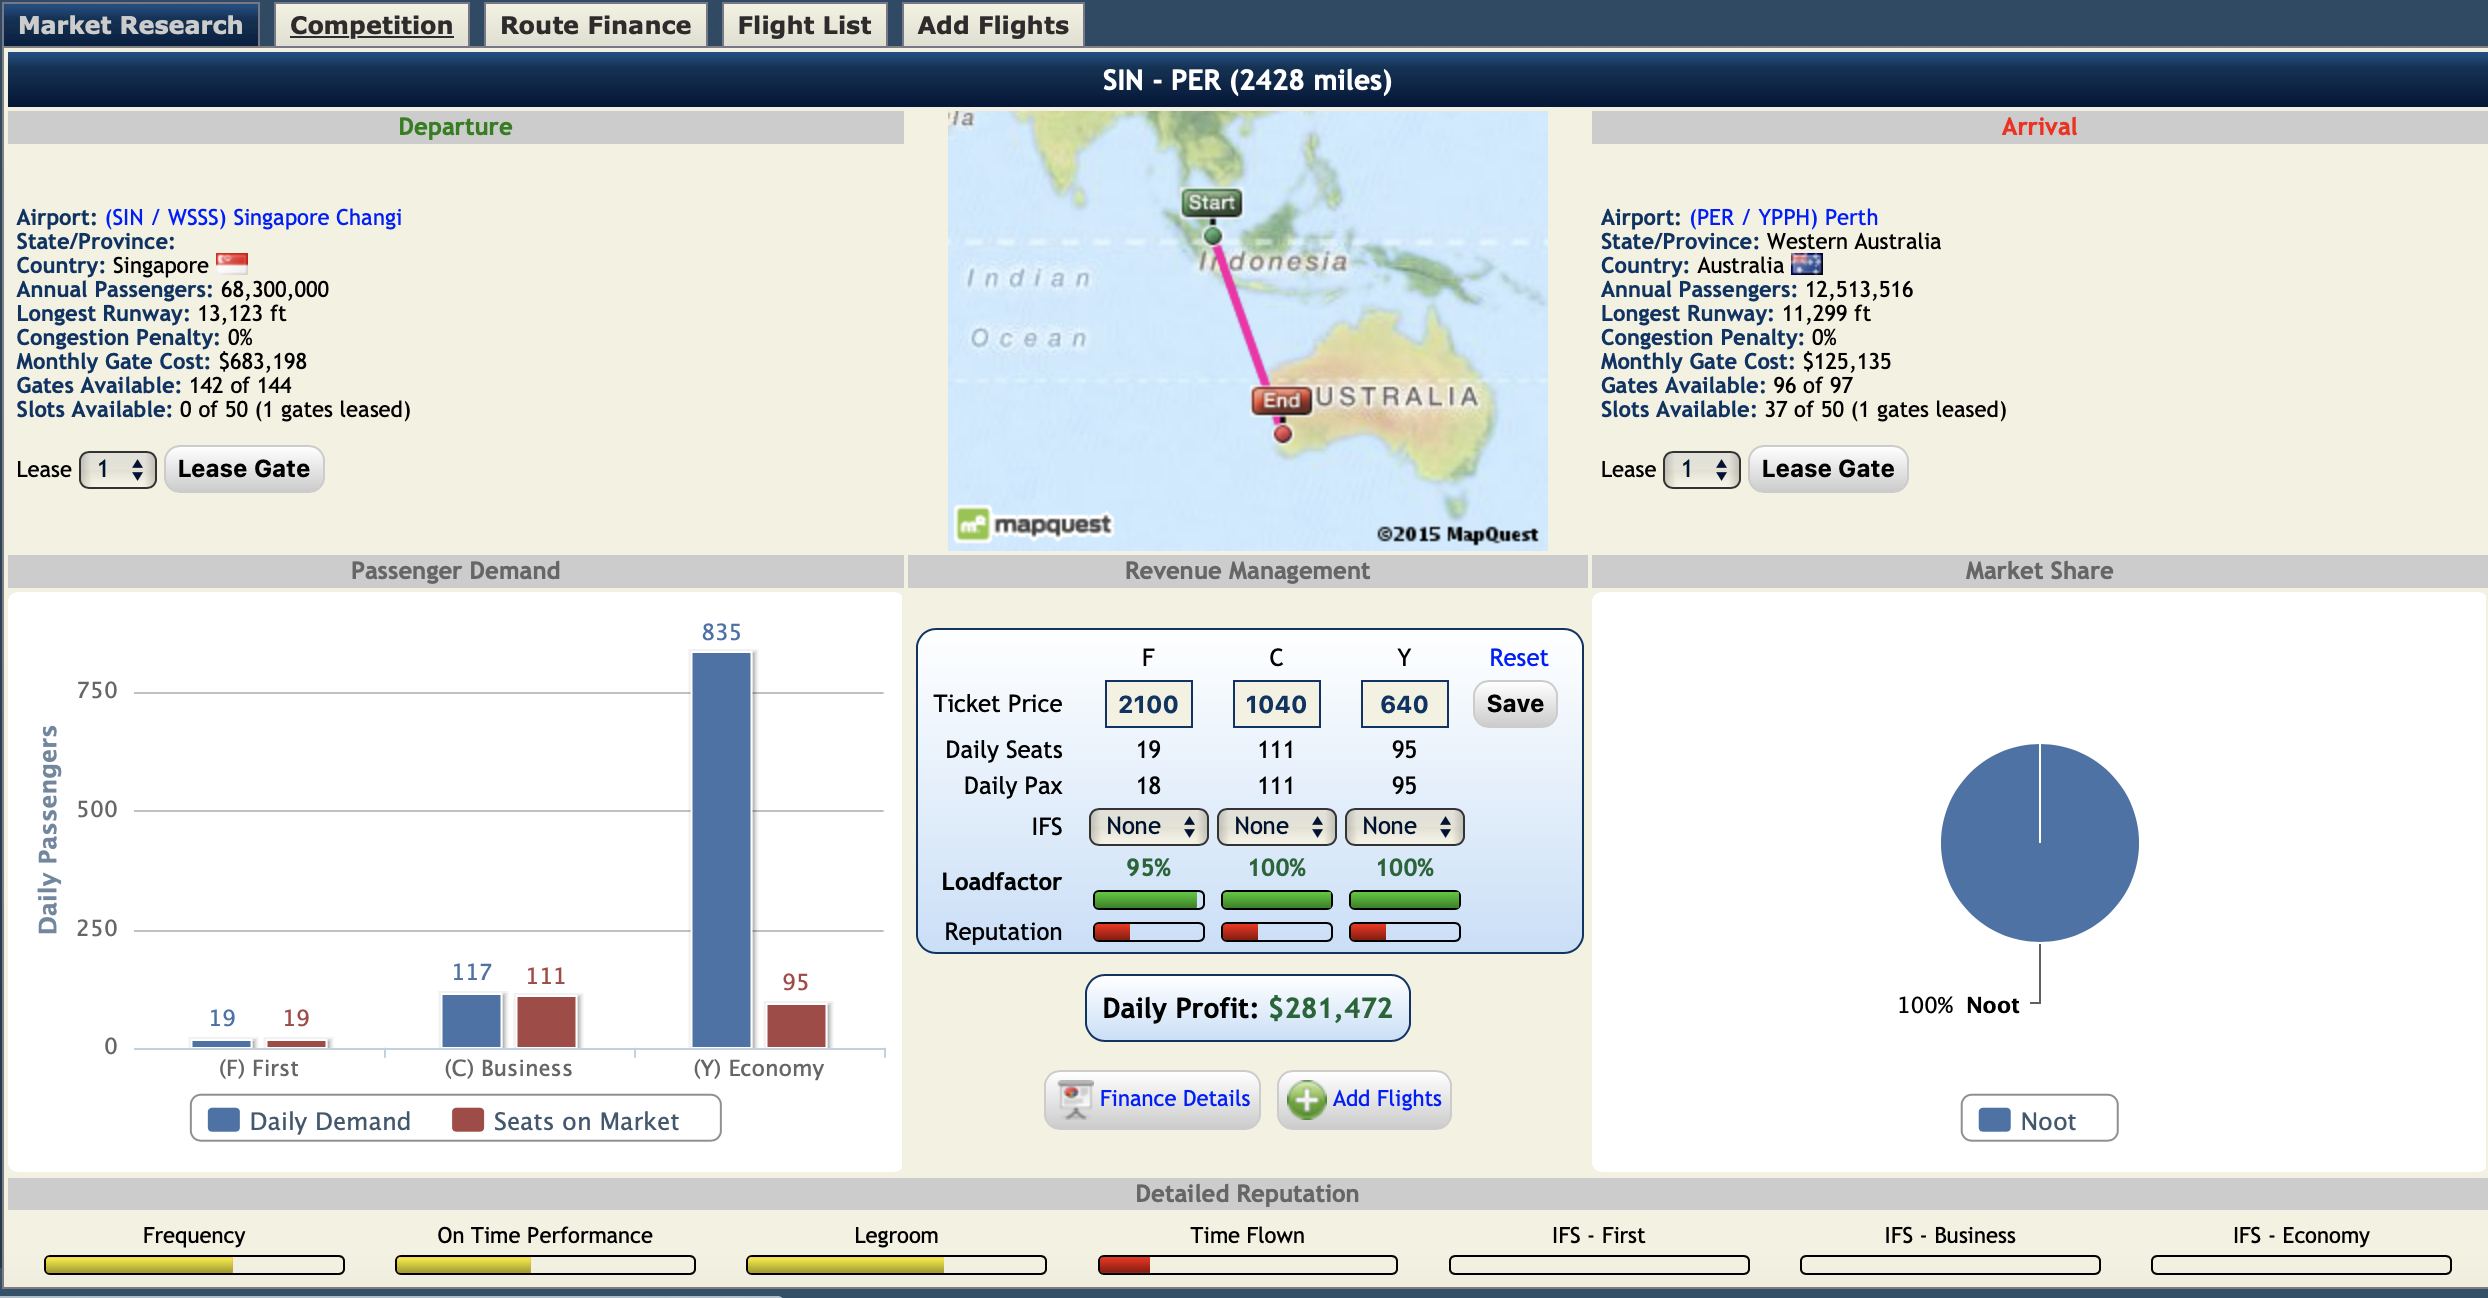 Airline Empire Screenshot of Singapore to Perth Route Configuration